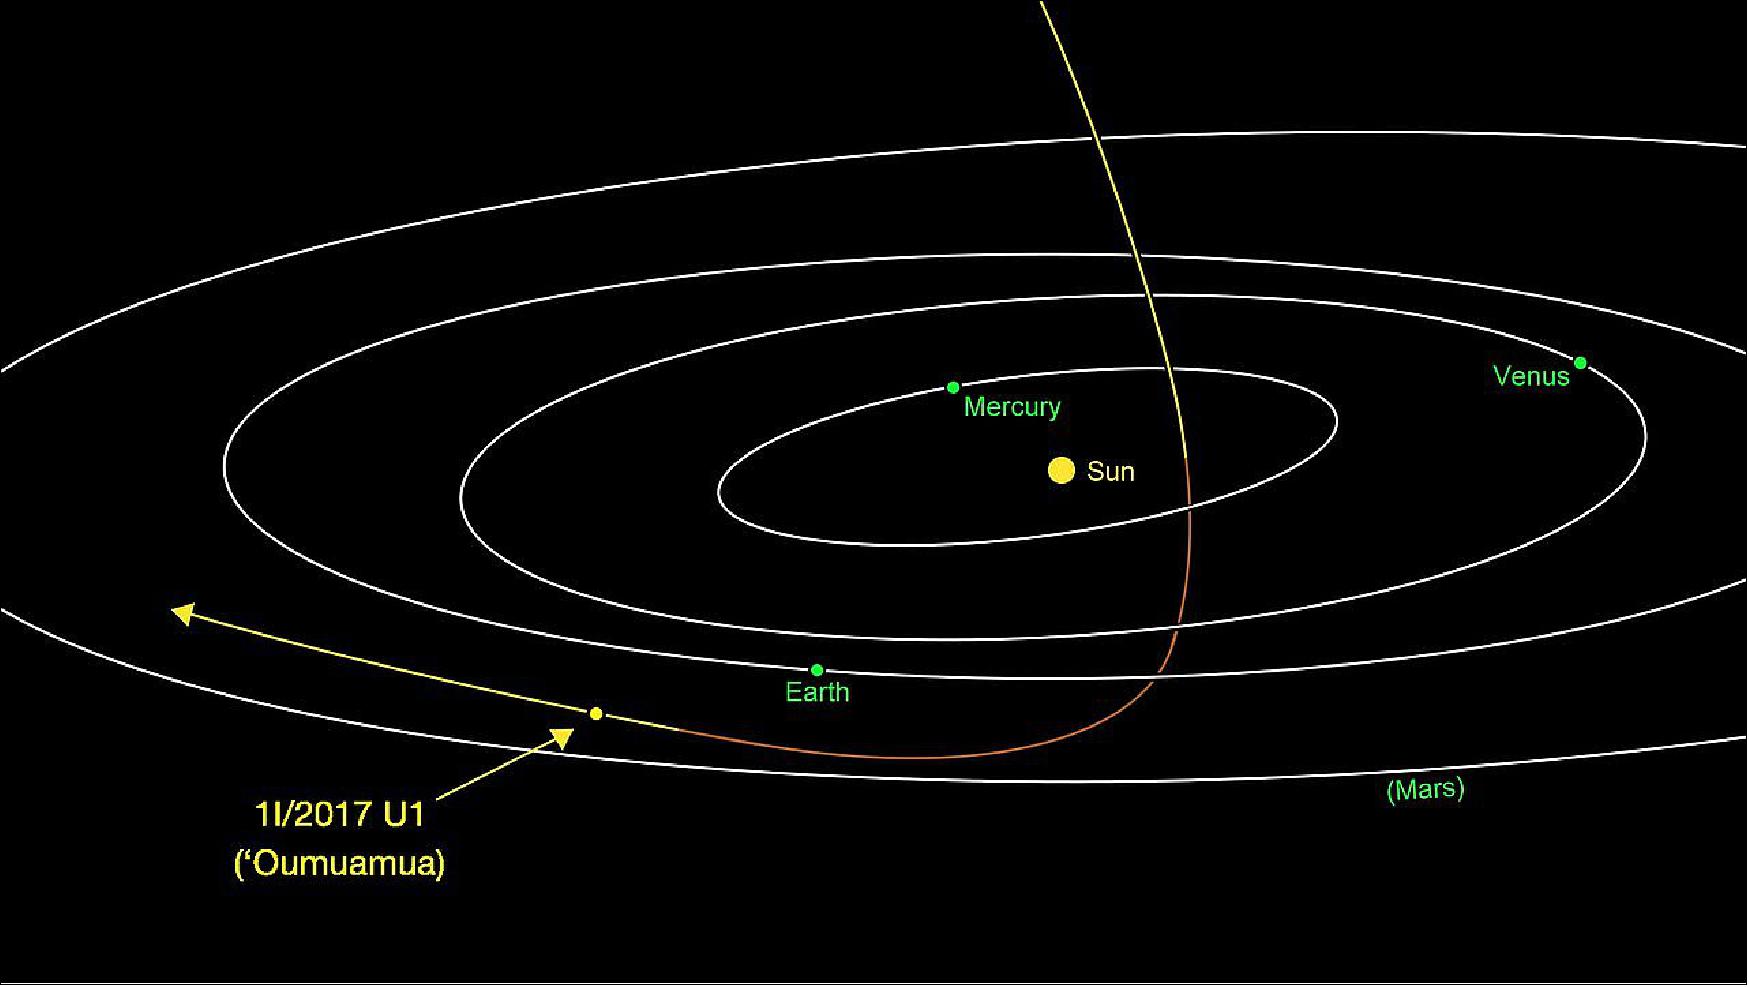 Figure 9: 1I/2017 U1 ('Oumuamua), previously known as C/2017 U1 (PAN-STARRS) and A/2017 U1, approaching from above, it was closest to the Sun on 9 September. Traveling at 44 km/s, the comet is headed away from the Earth and Sun on its way out of the Solar System (image credit: NASA/JPL-Caltech/IAU)